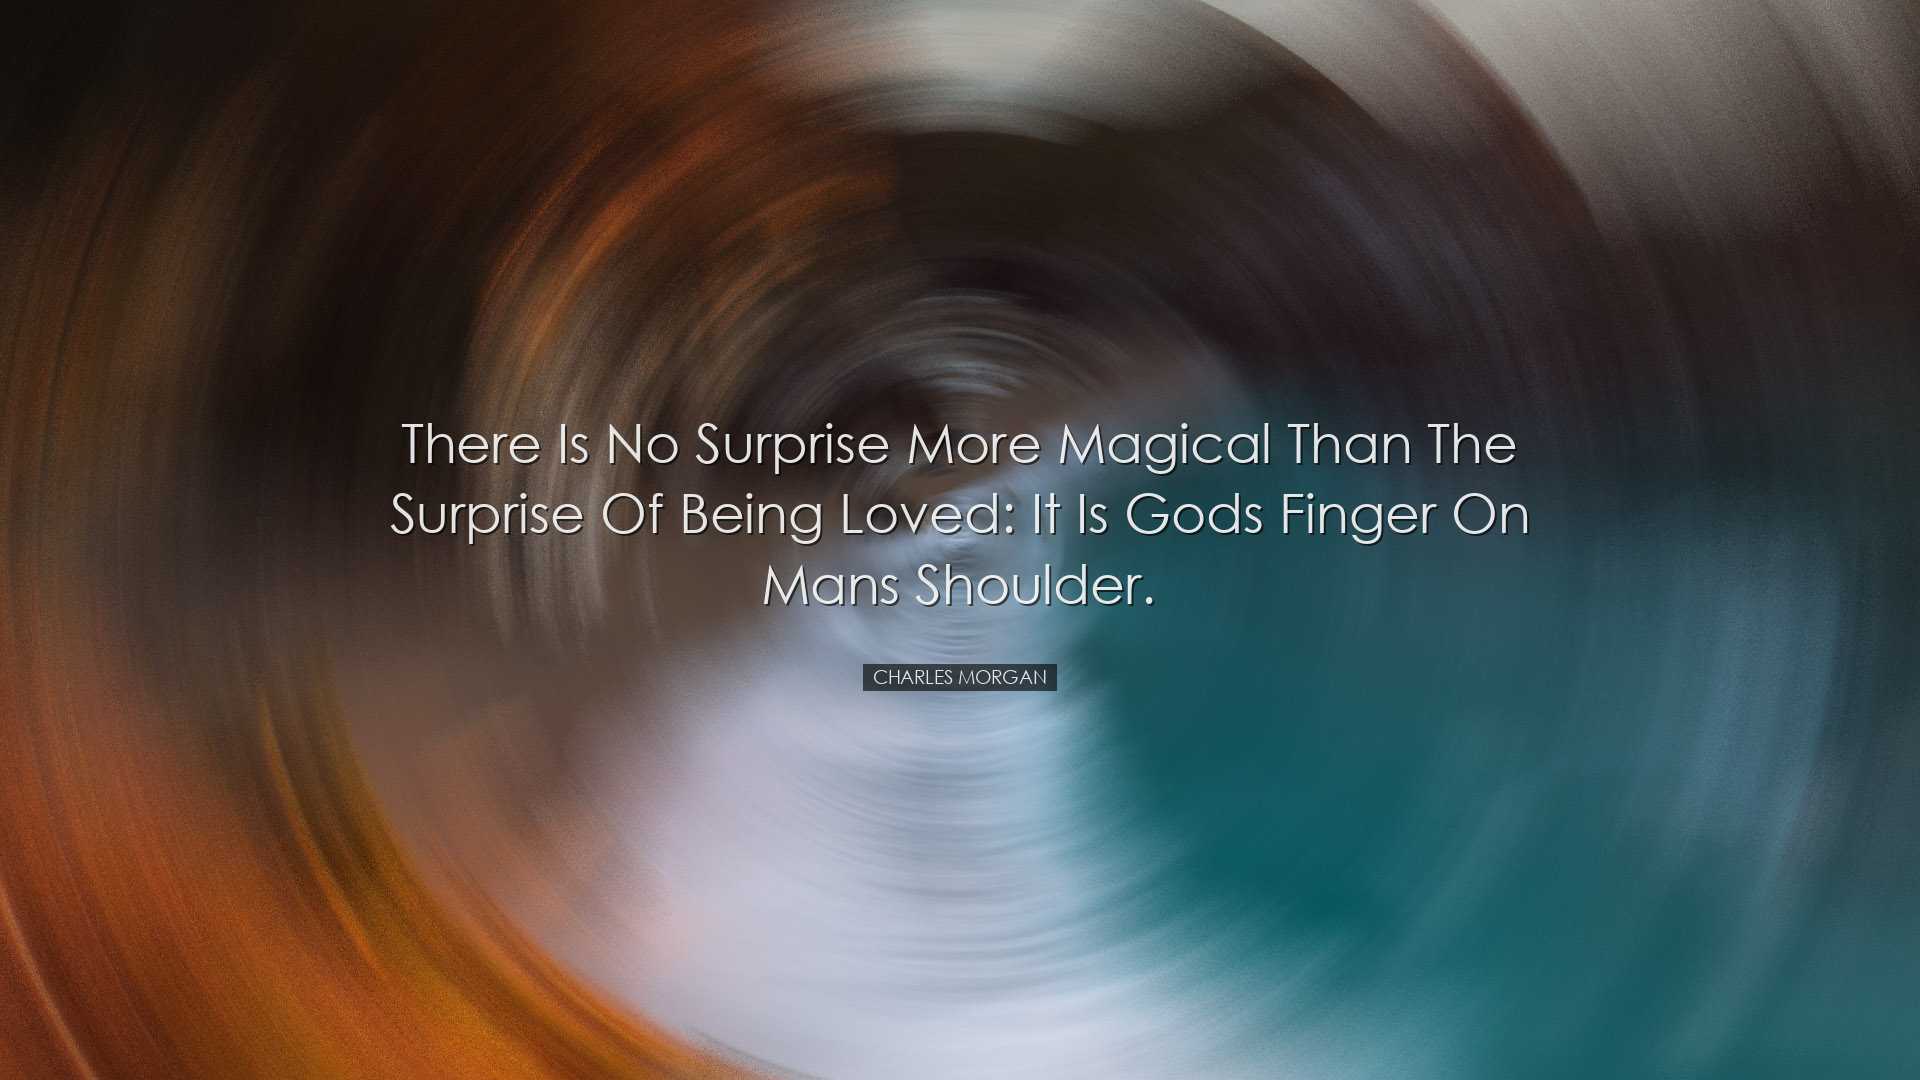 There is no surprise more magical than the surprise of being loved